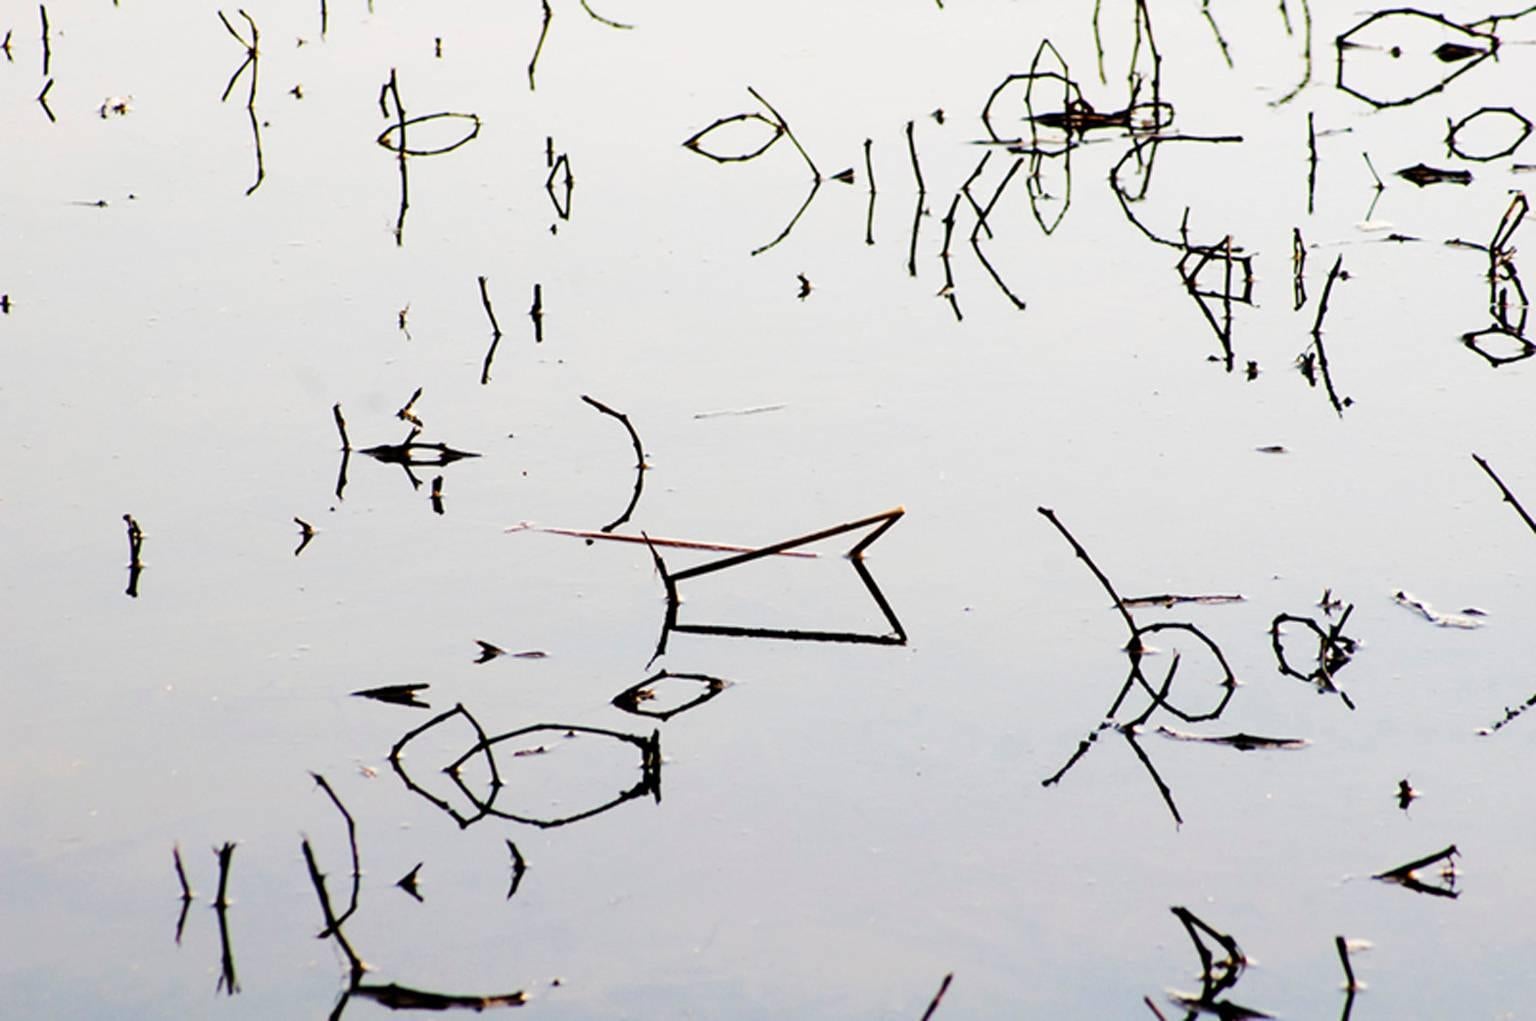 Glyph 2 (Black & White Abstract Photo of Reflections in Water)